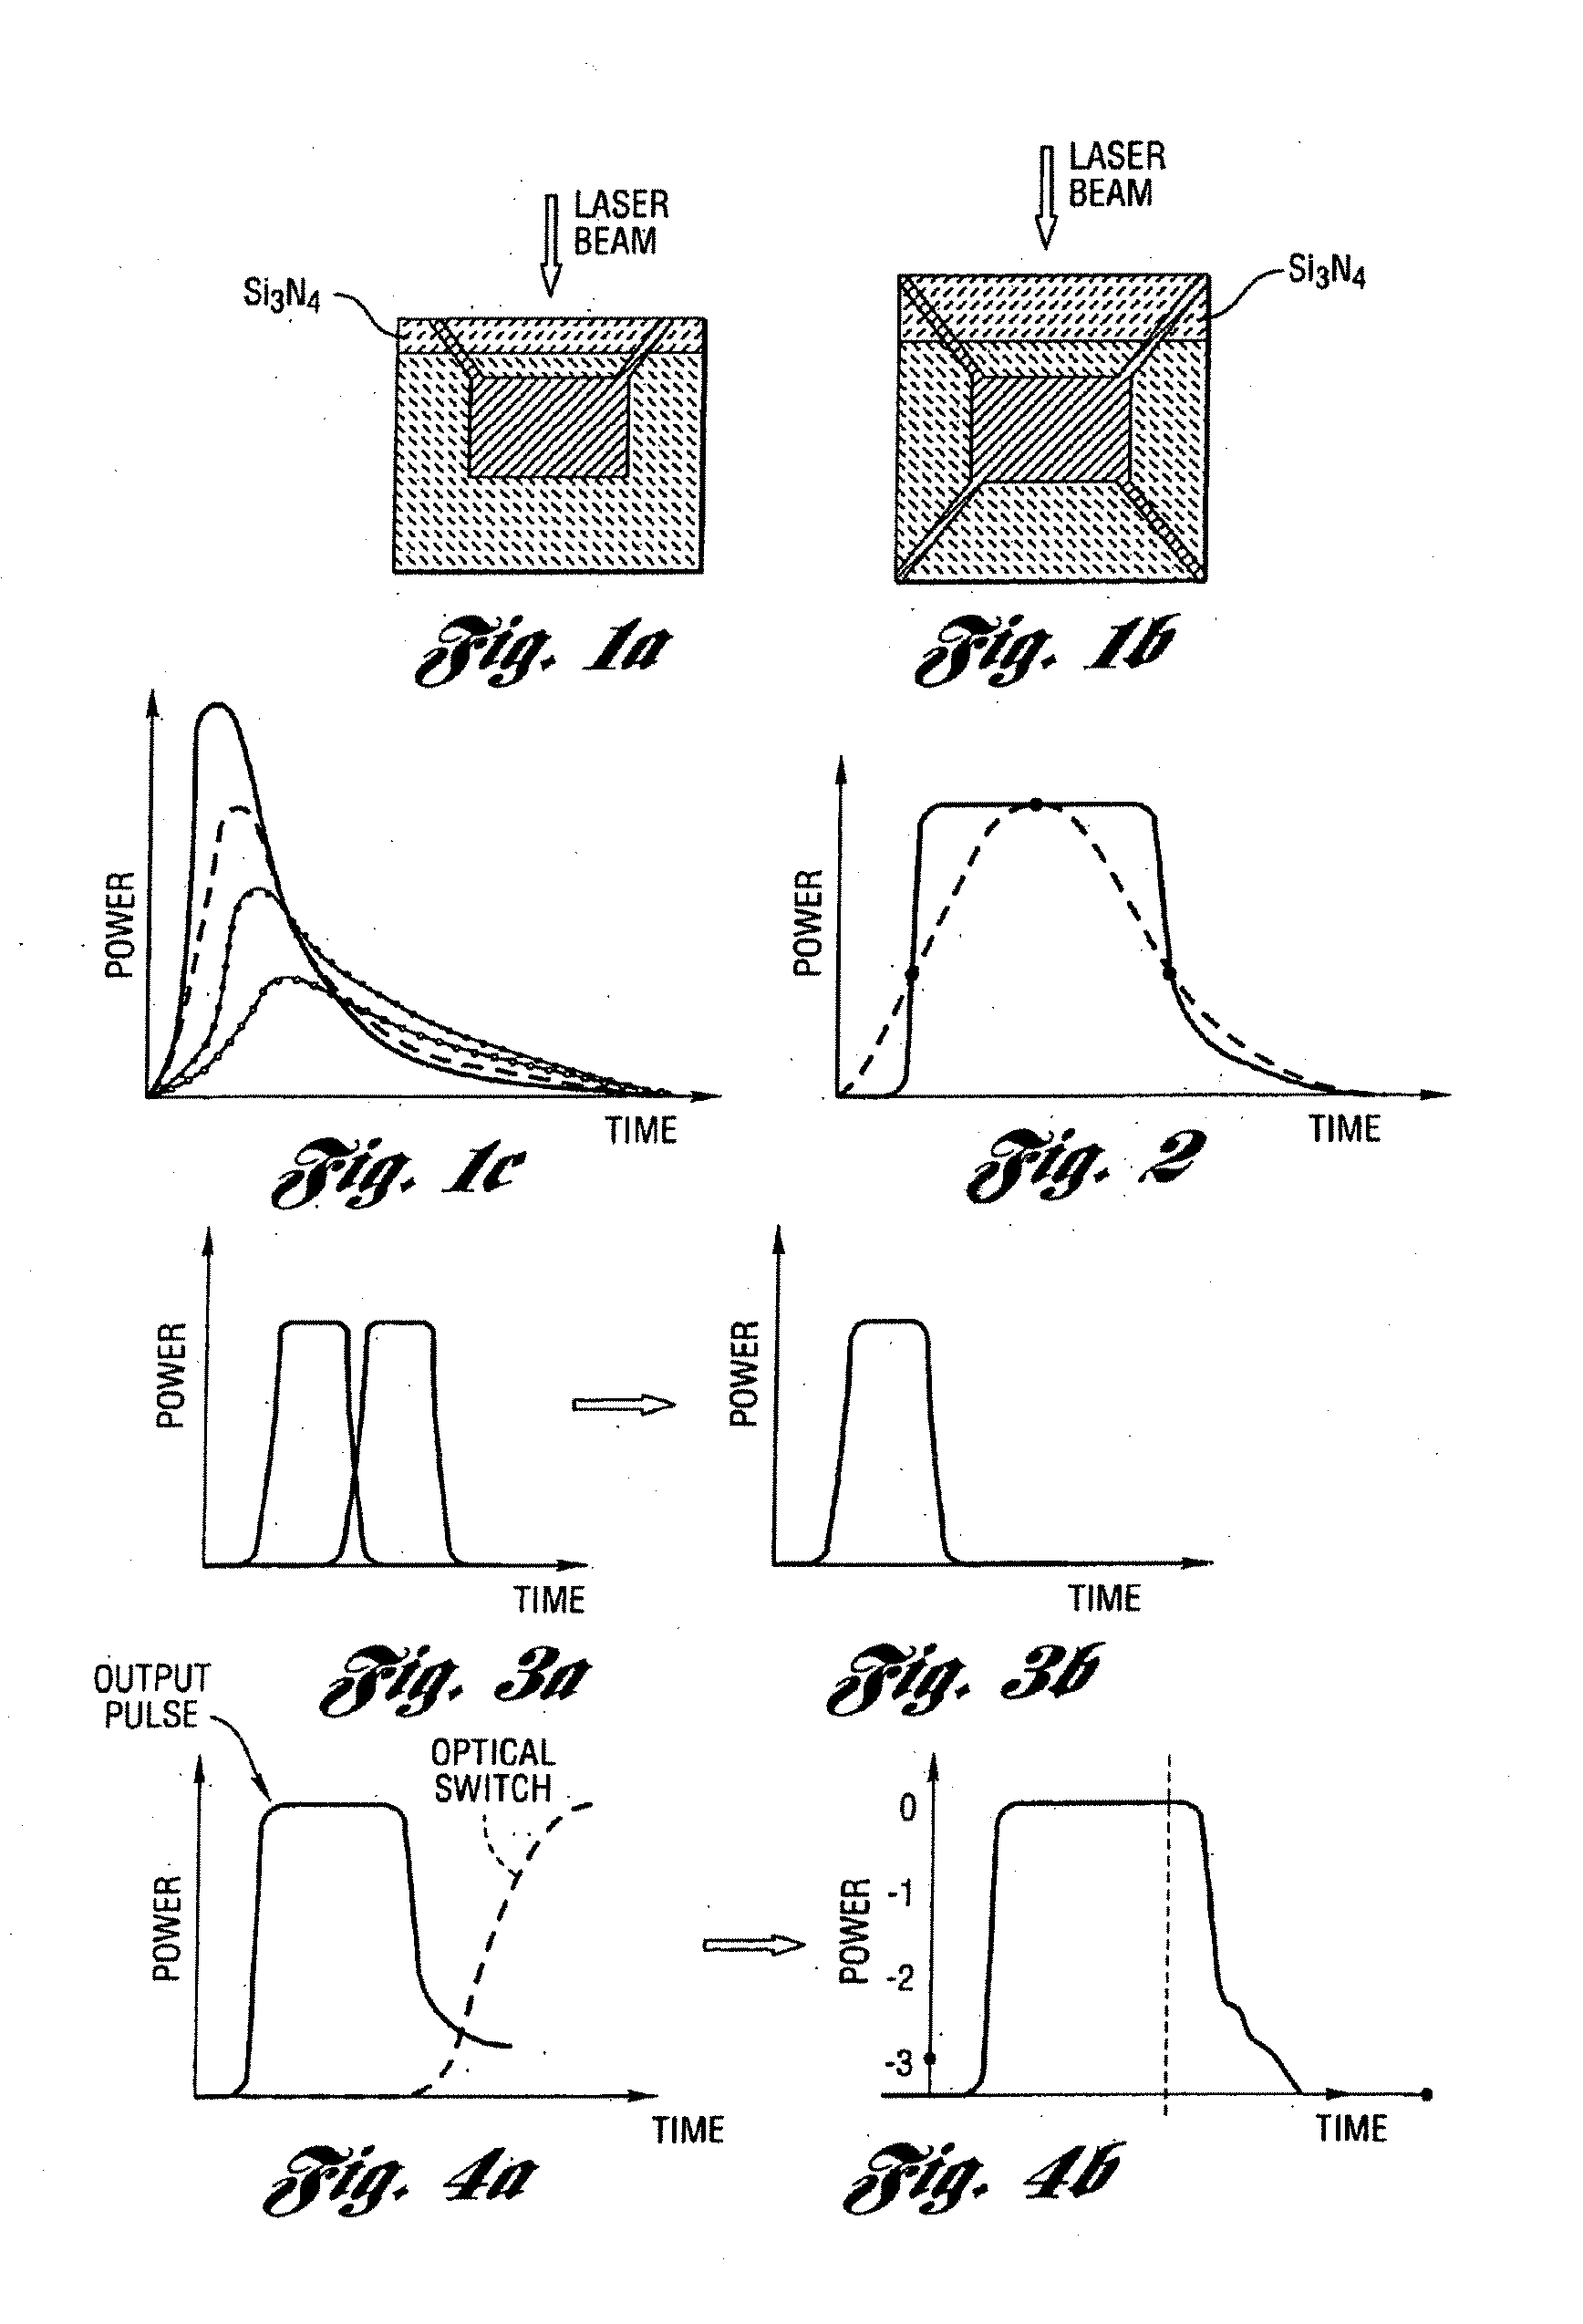 Energy efficient, laser-based method and system for processing target material